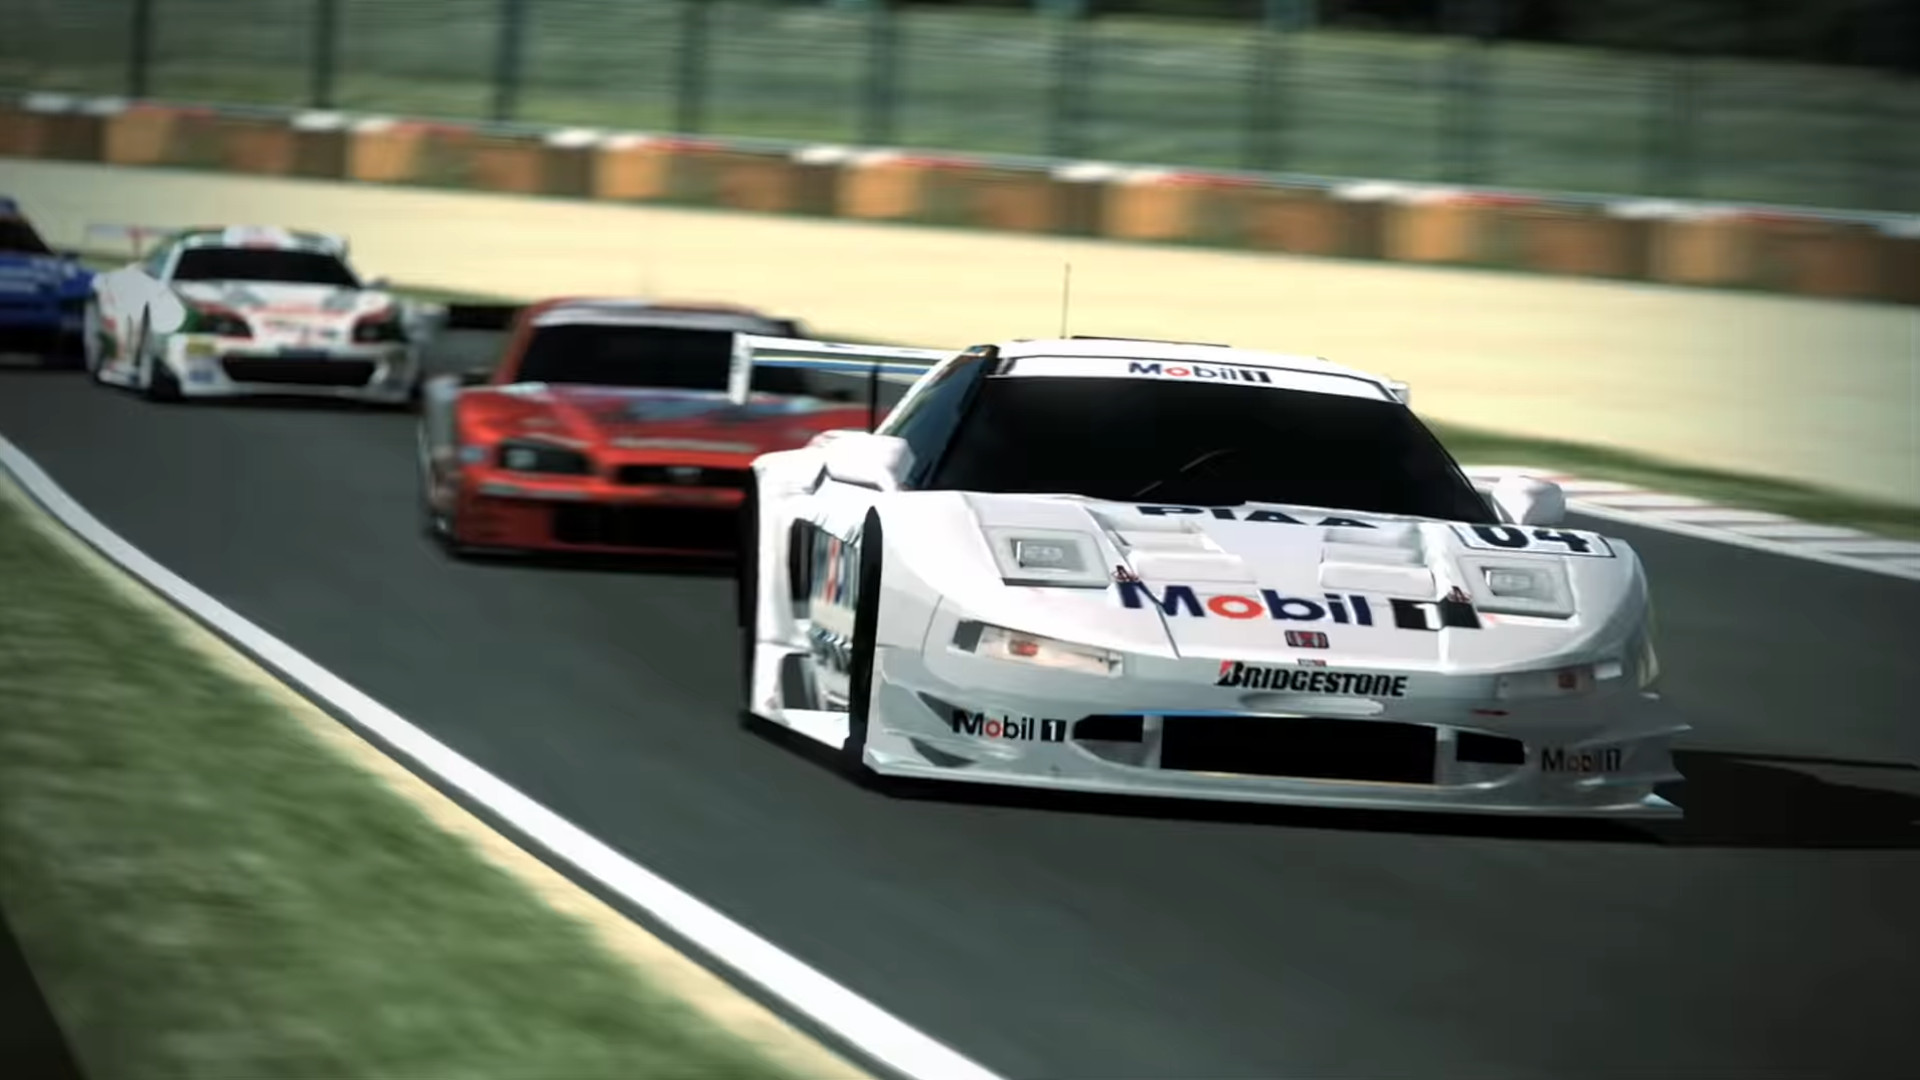 Gran Turismo PSP vs Gran Turismo 4 - Which one looks the best? 